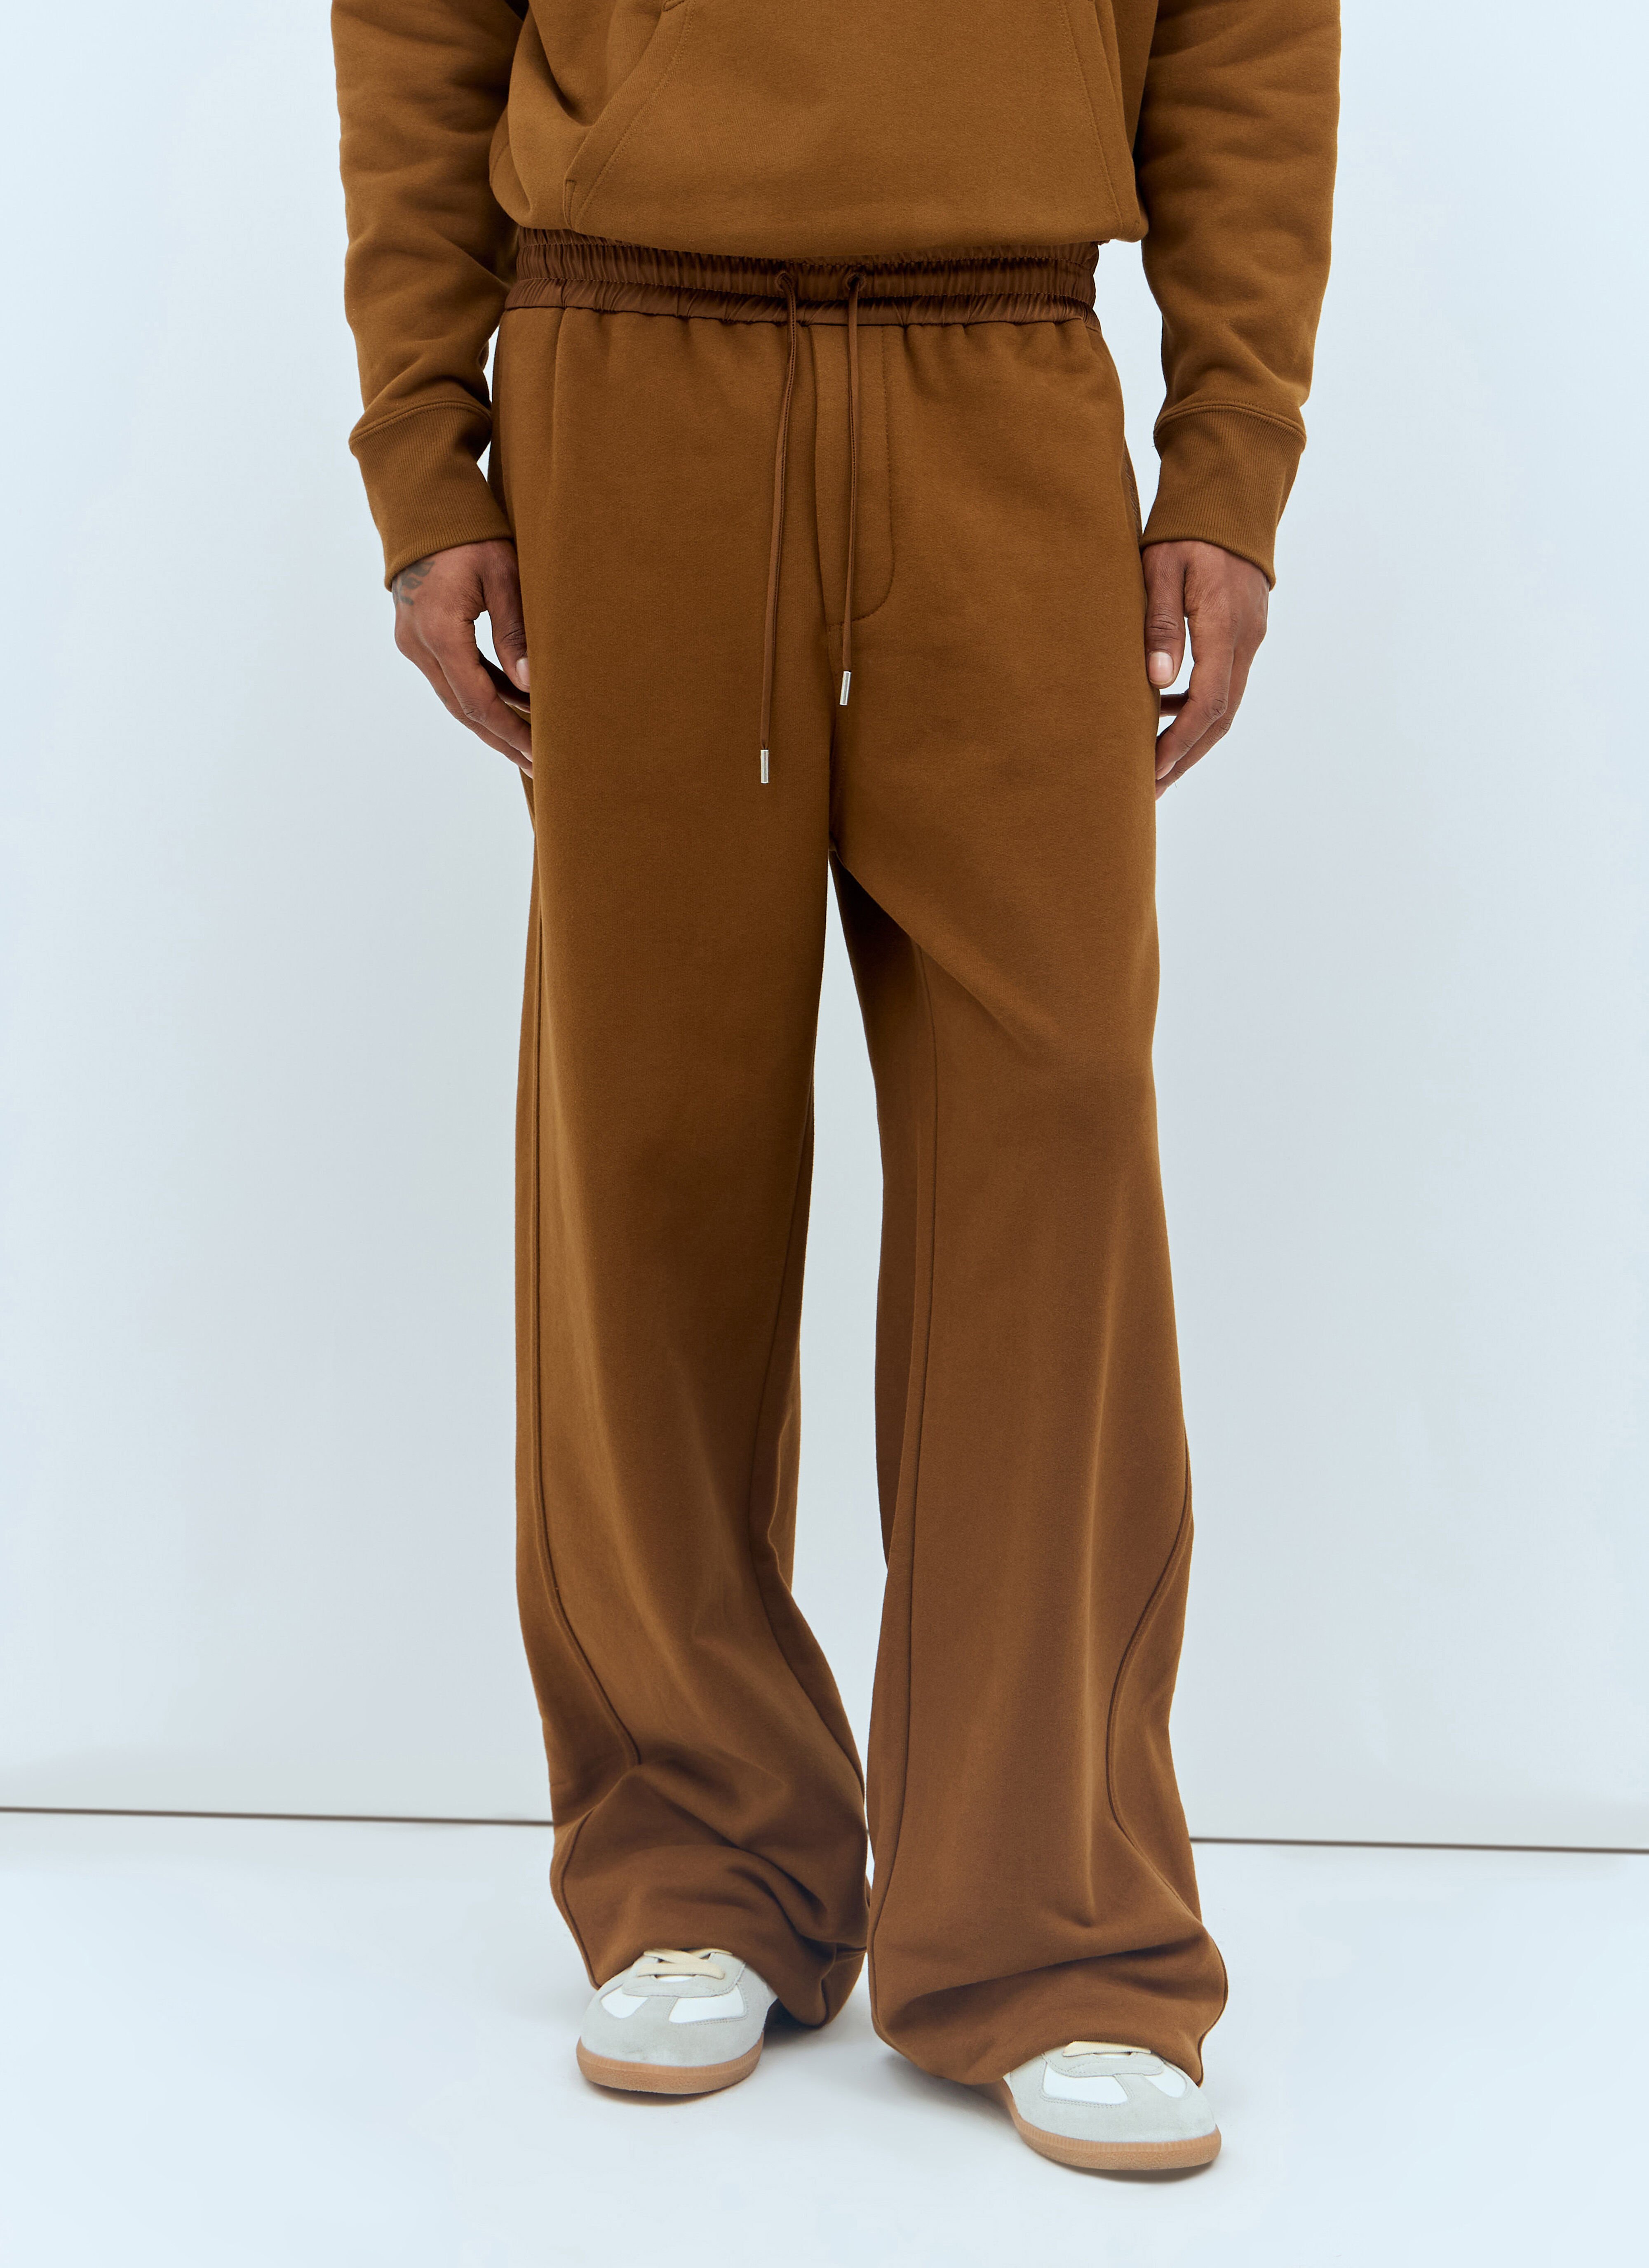 Lanvin Logo Embroidery Track Pants Brown lnv0157004